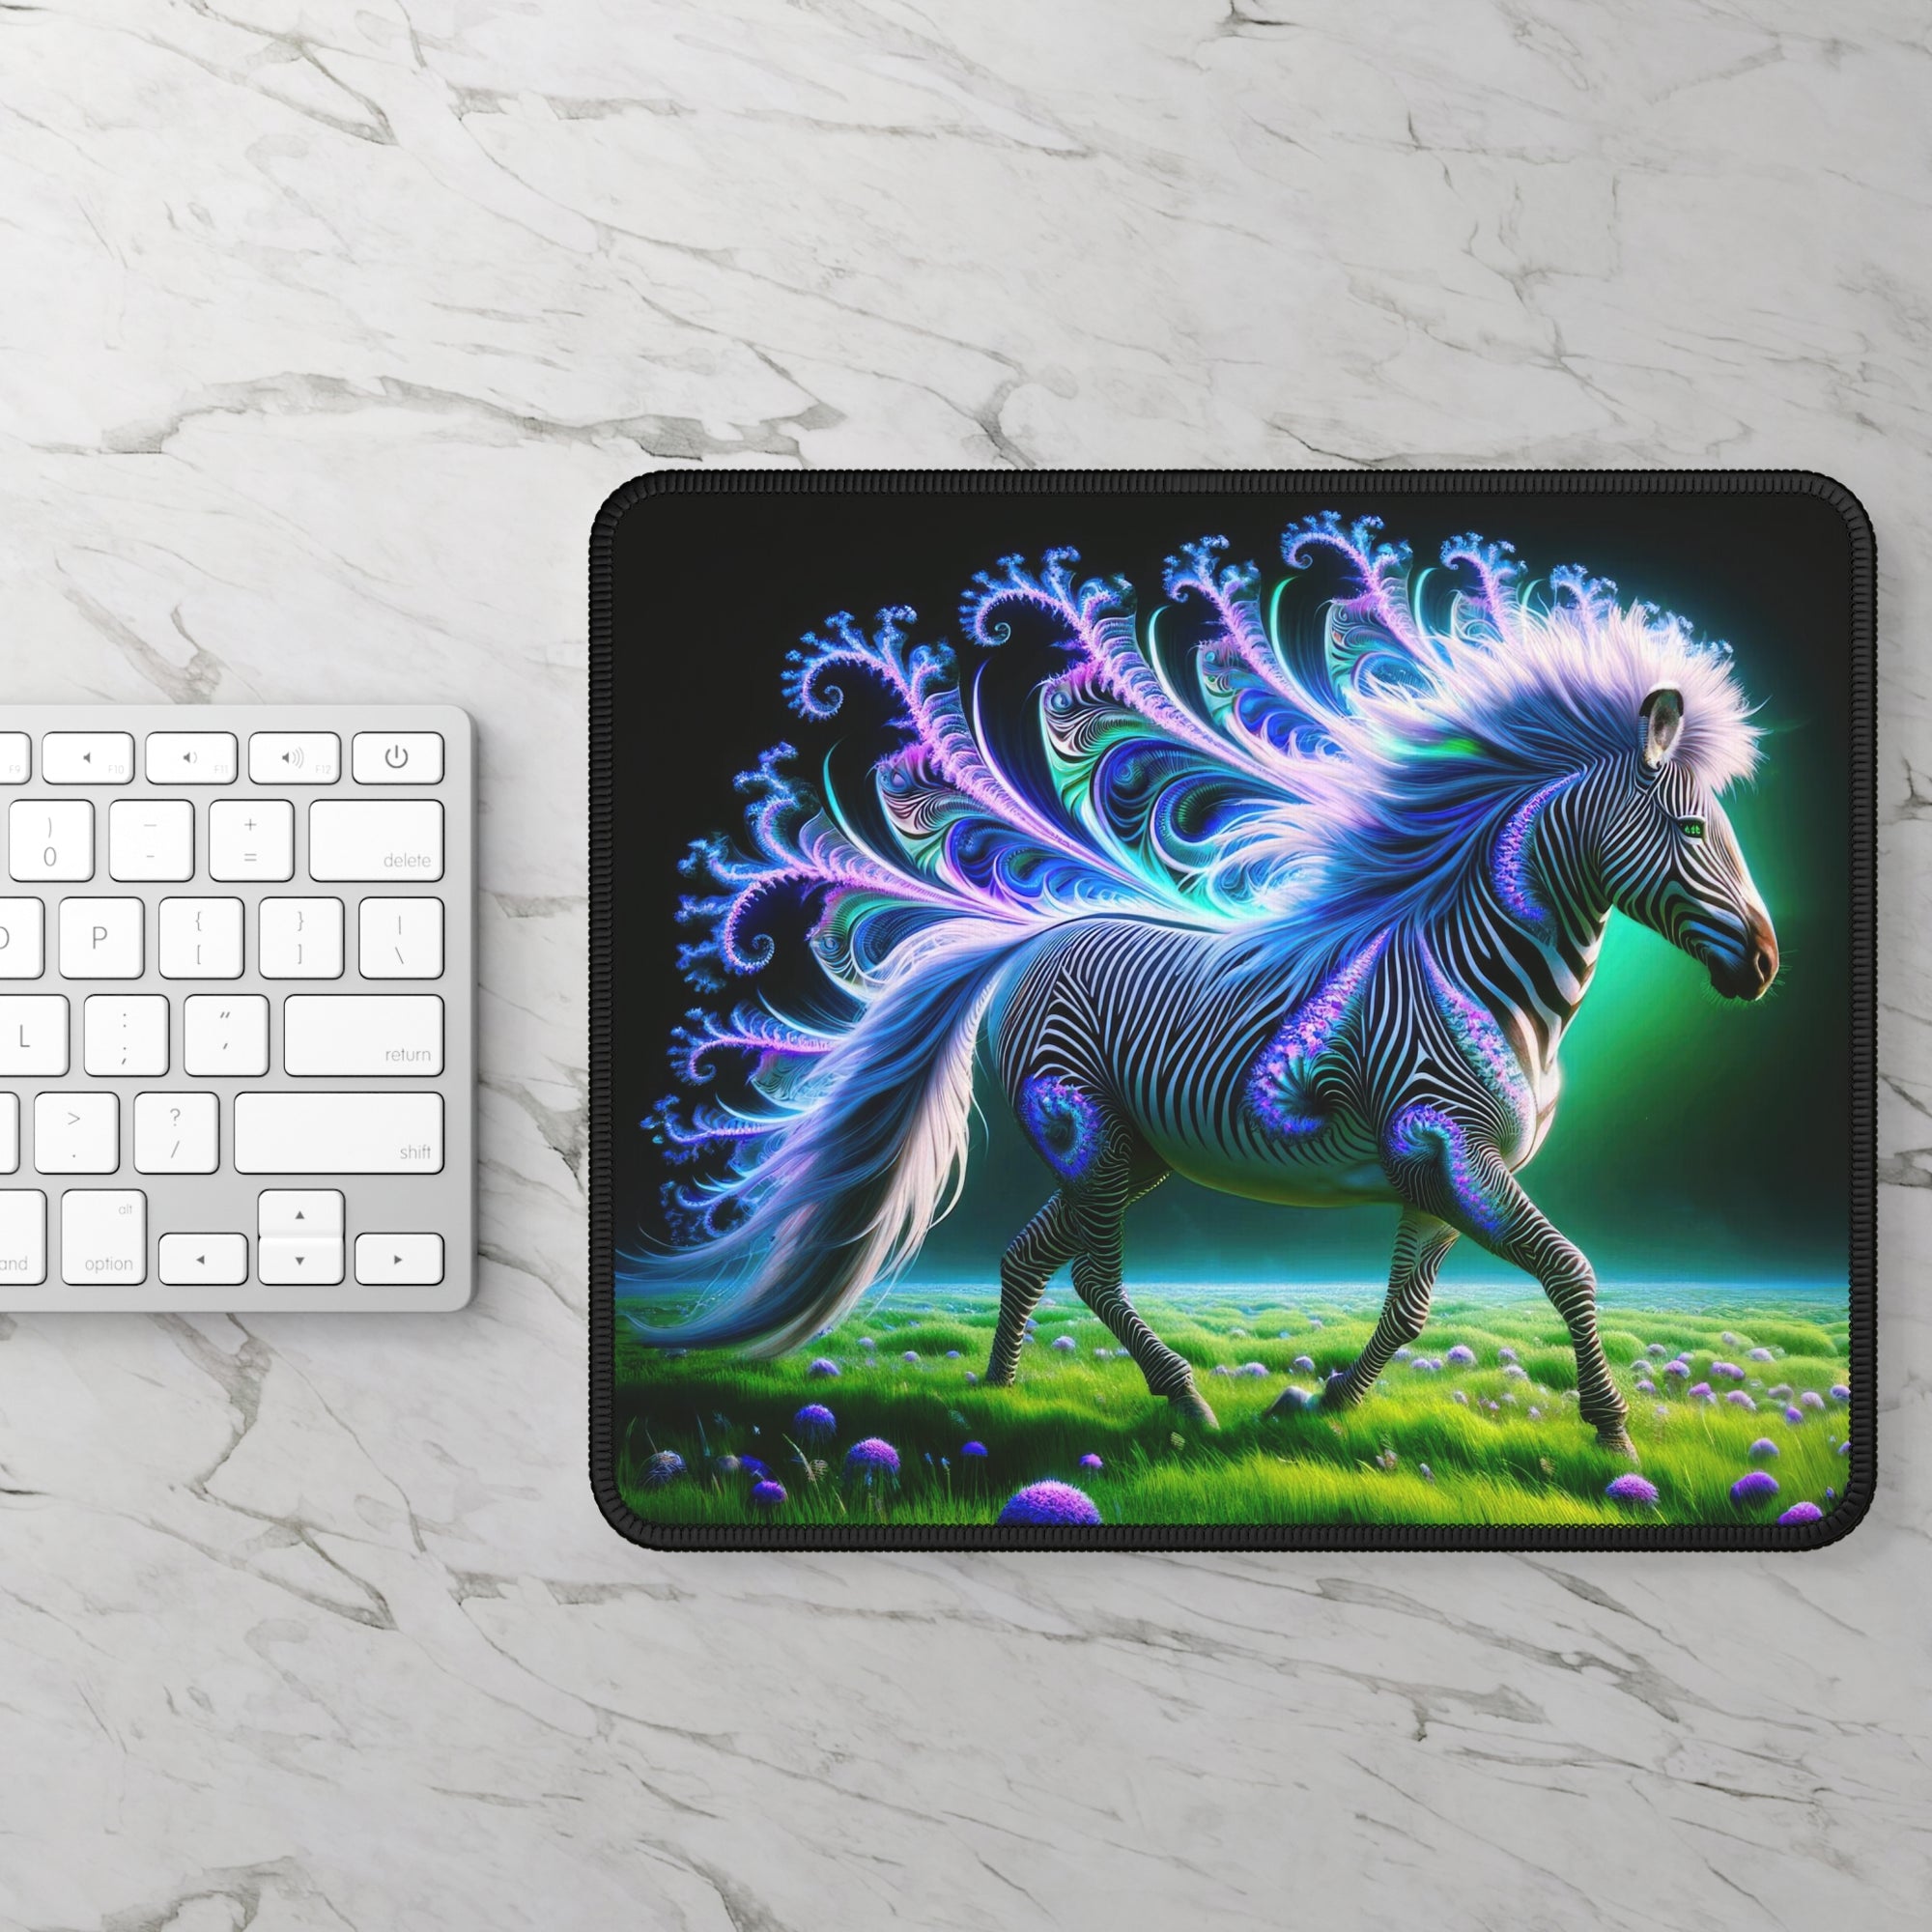 Radiant Stripe Gaming Mouse Pad